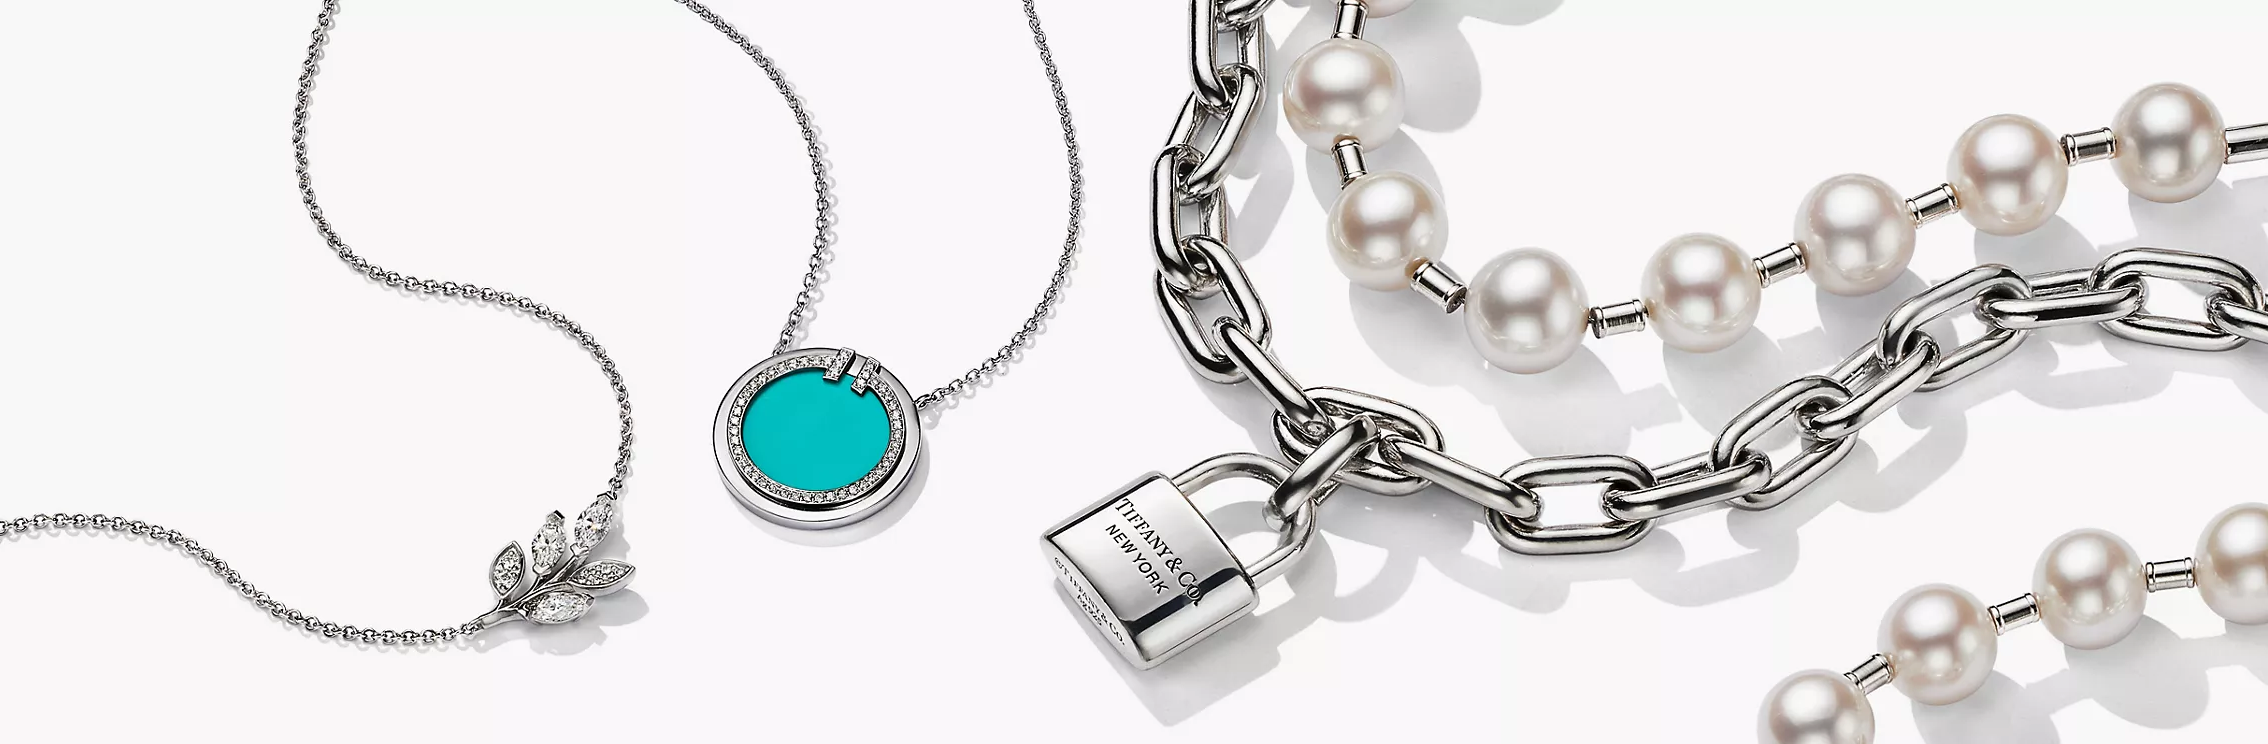 How to Tell if Tiffany & Co. Jewelry is Real